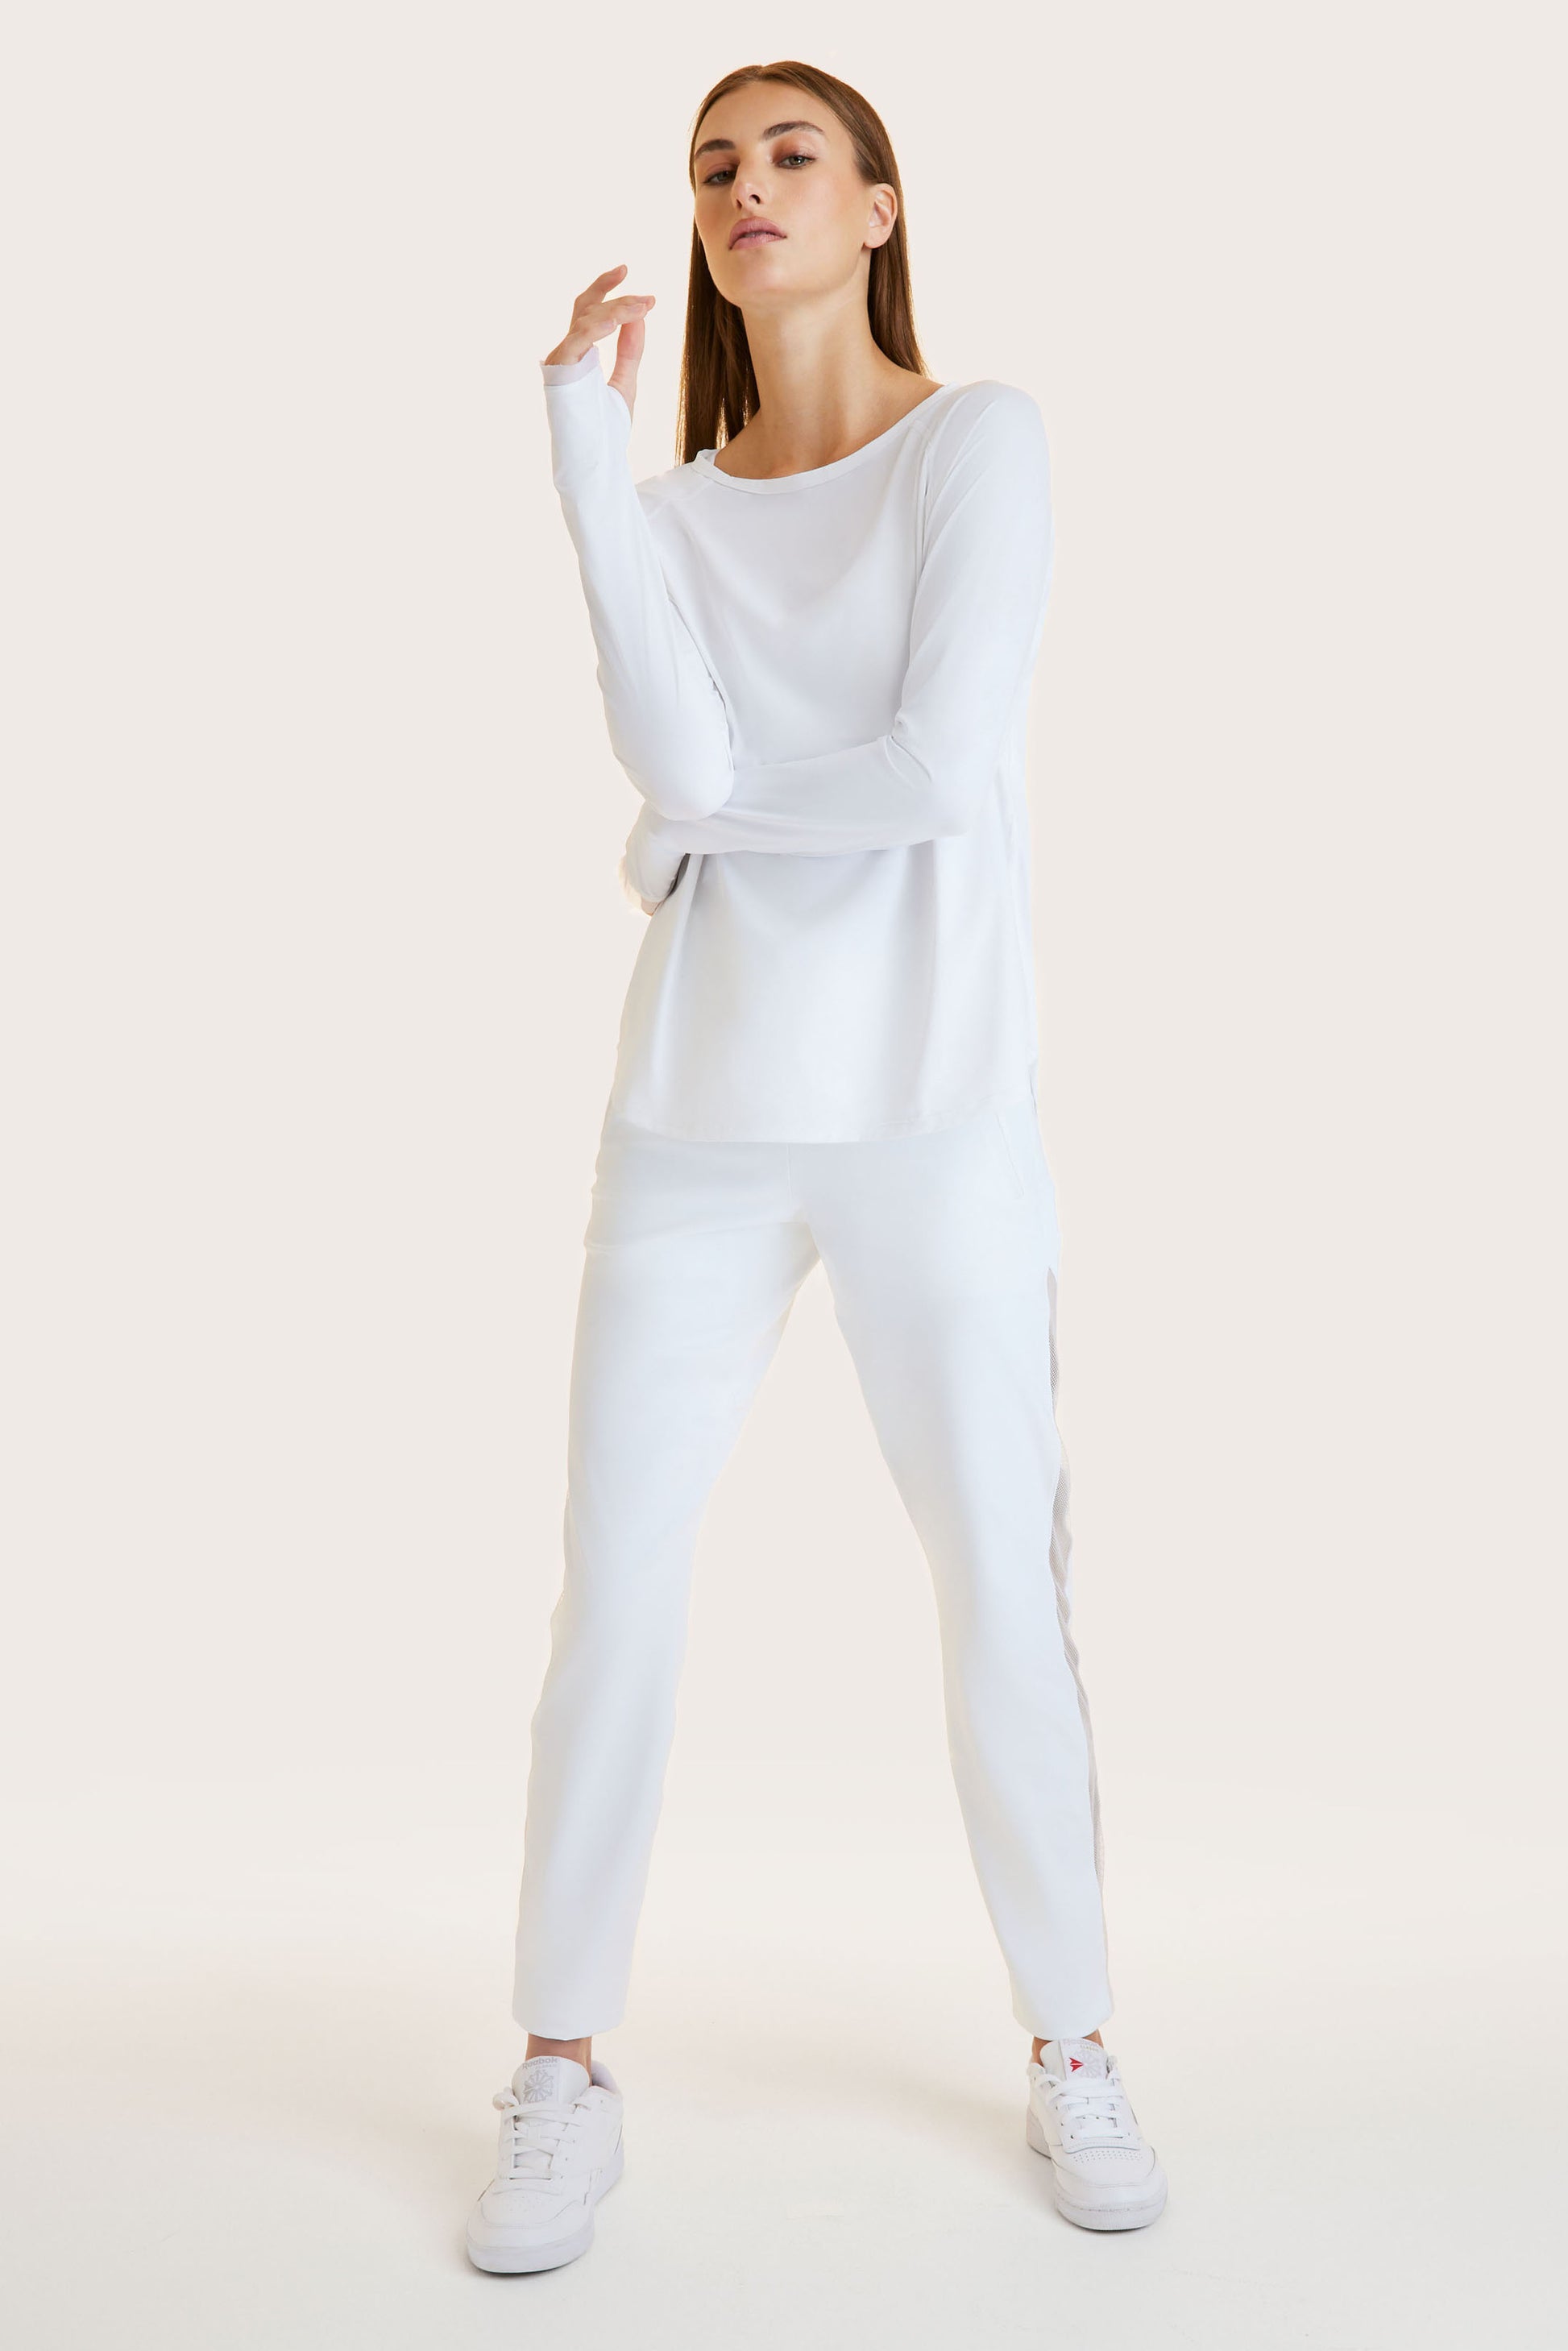 Alala women's active pant in white